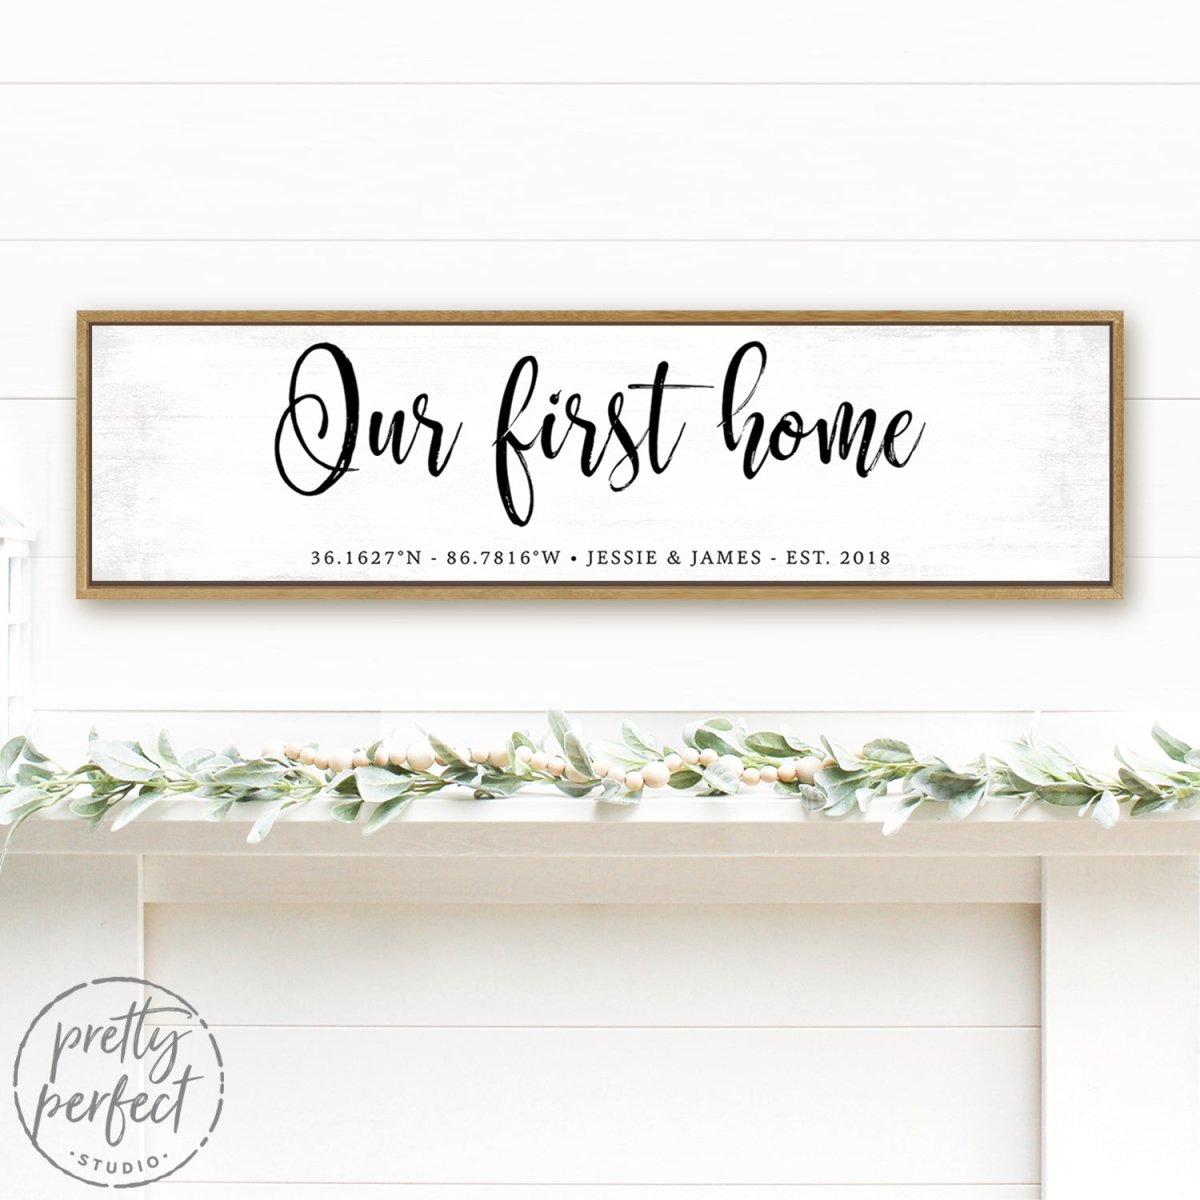 Our First Home Sign Personalized with Coordinates, Name & Established Date Above Shelf - Pretty Perfect Studio